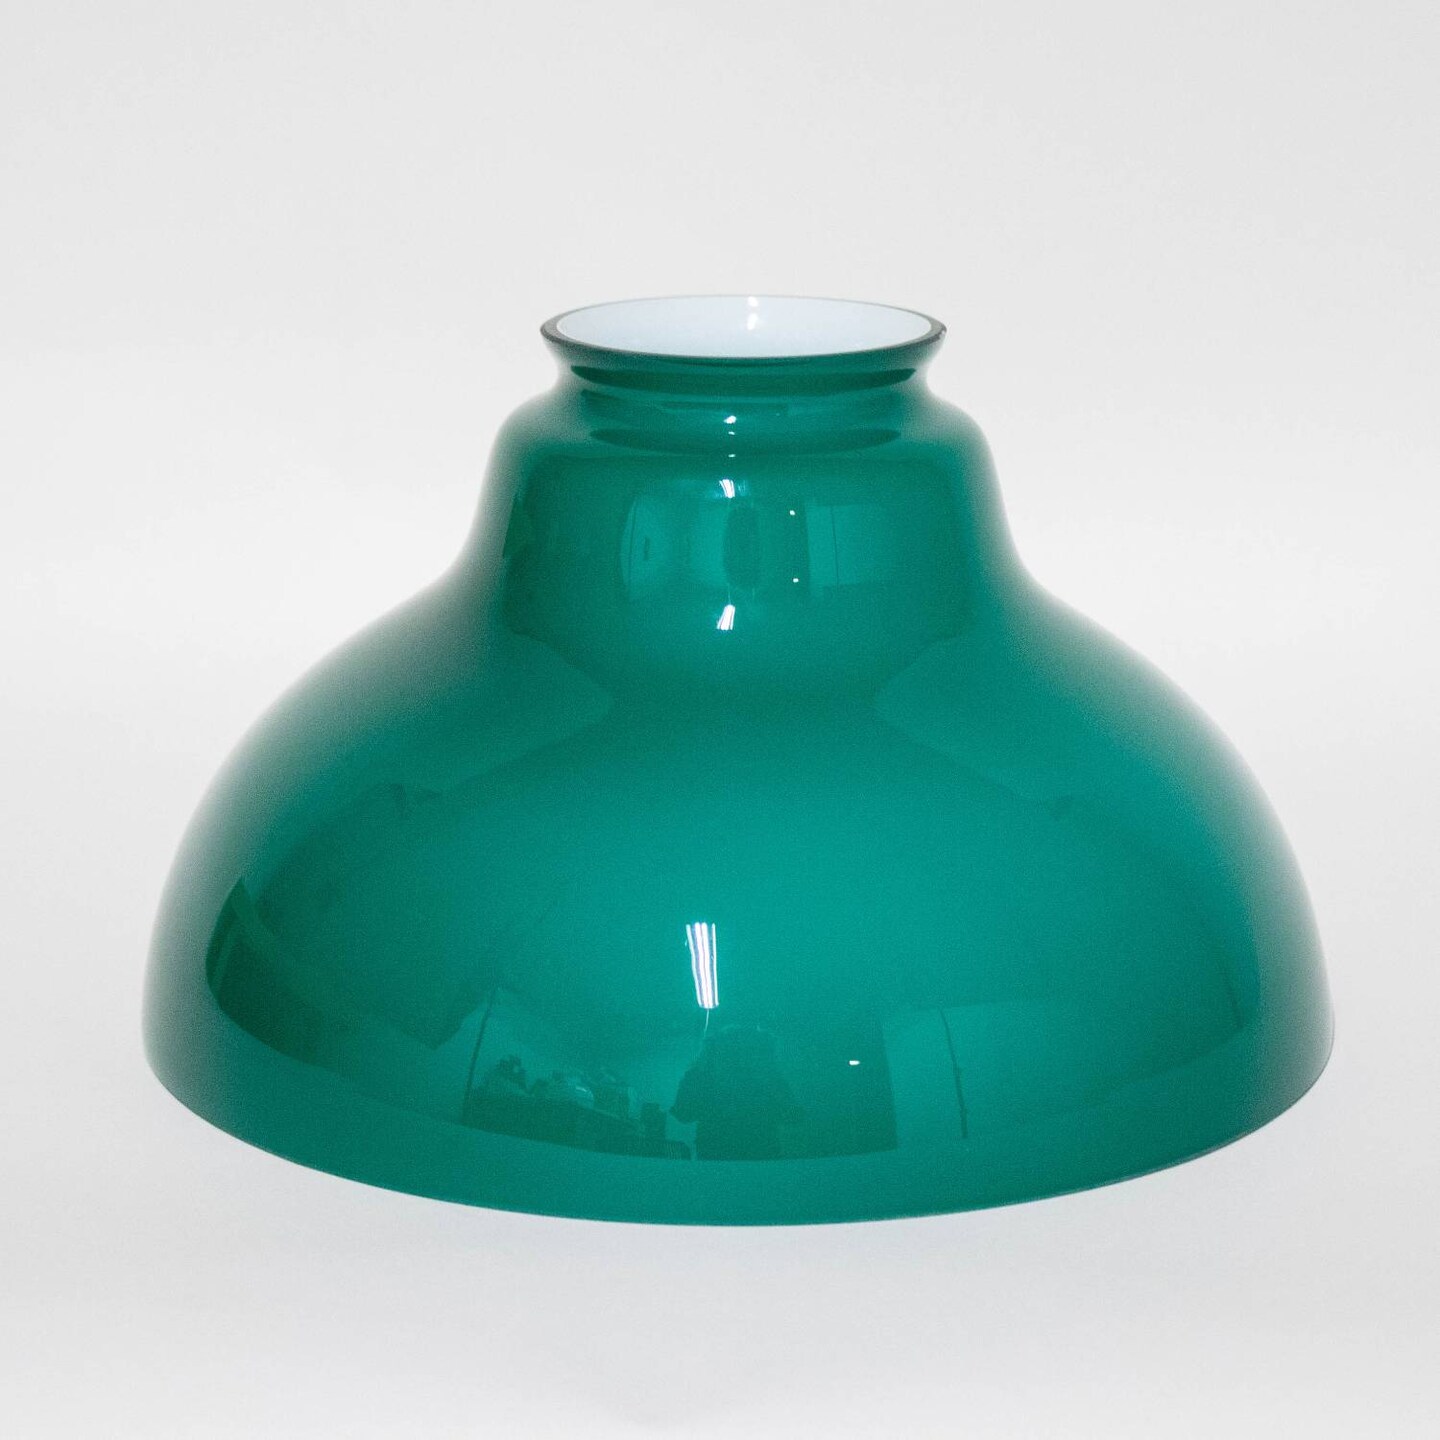 Aladdin Oil Lamp Glass Shade for Hanging Lamps, Green, 12 inch Base Fitter, N21010